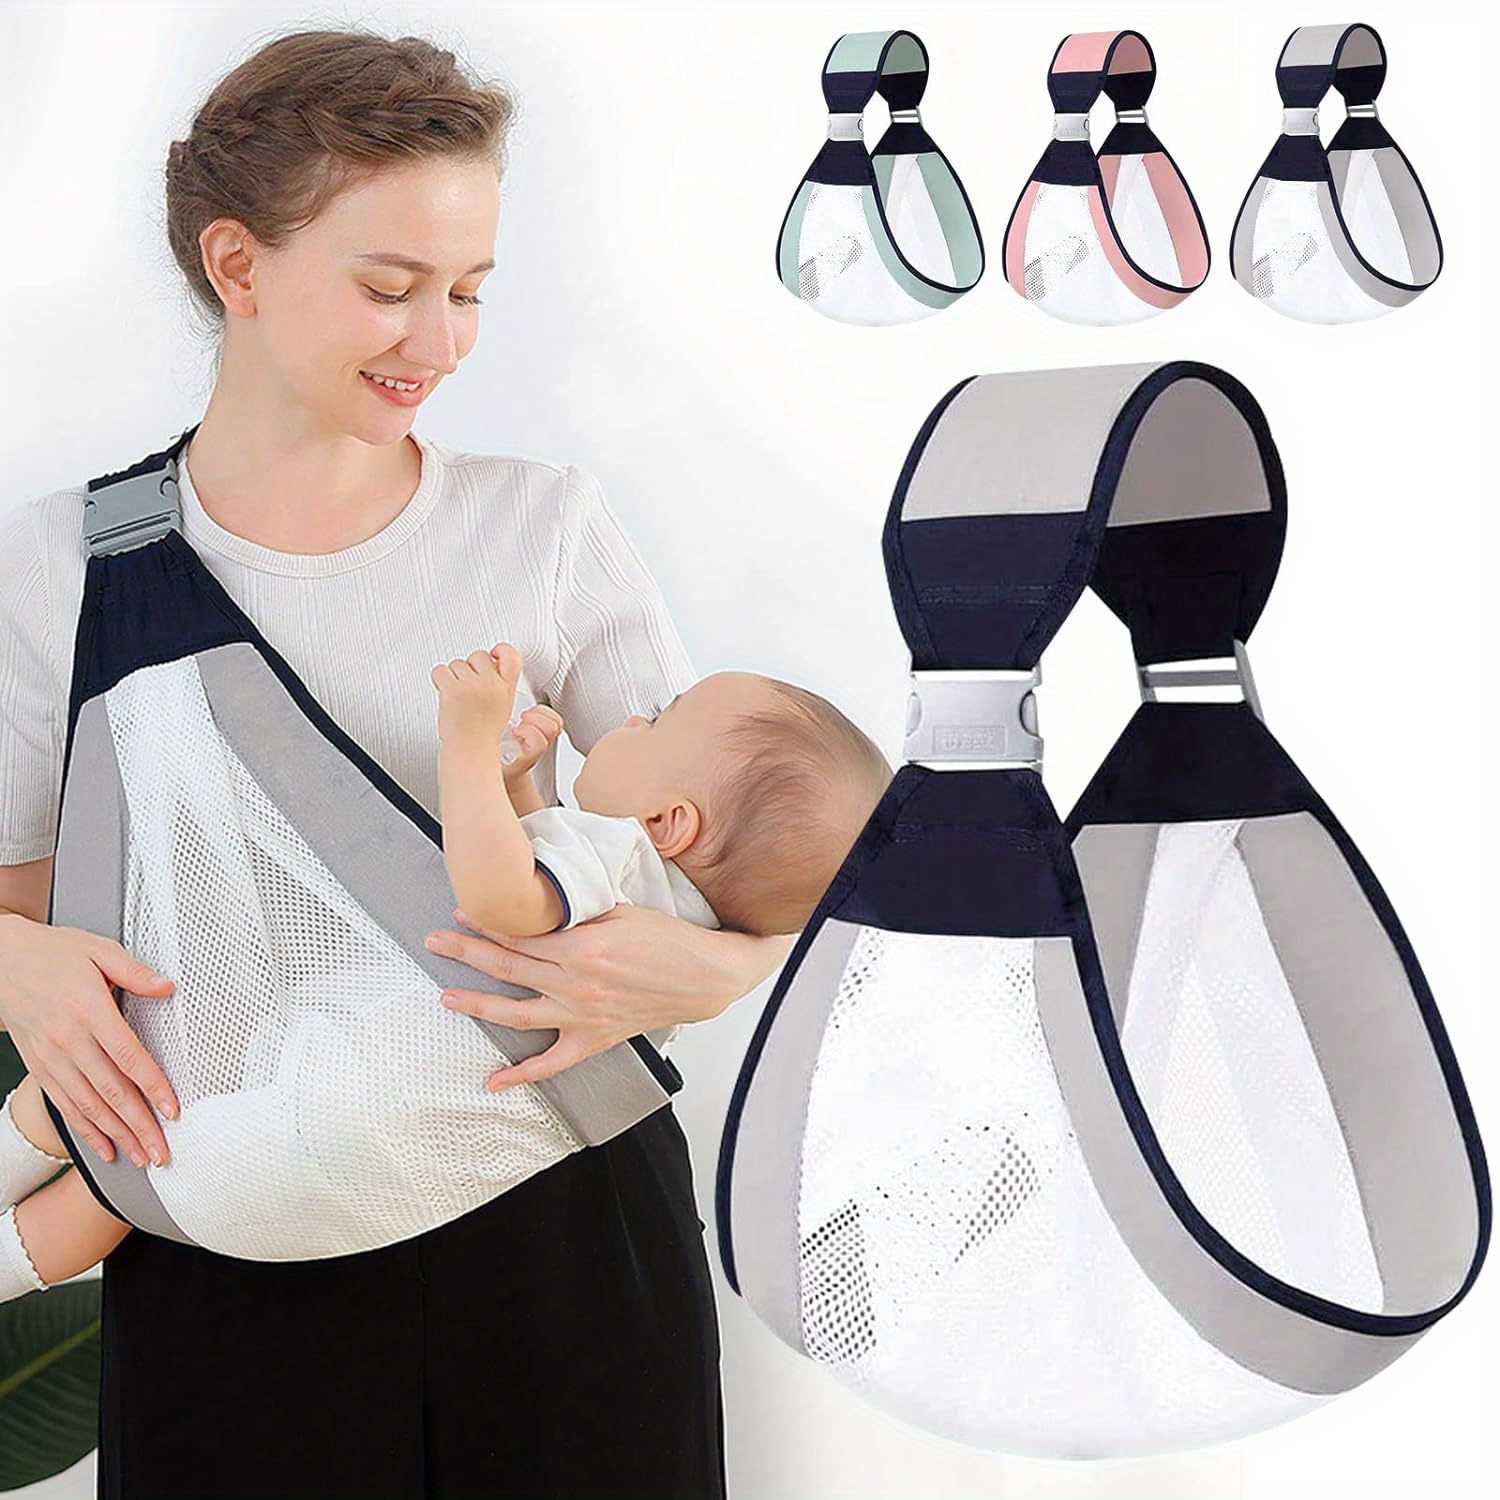 

Cotton Baby Carrier Sling With Breathable Mesh, Ergonomic 1 Shoulder Baby Hip Holder For Newborns To Toddlers 0-3 Years, Adjustable Wrap For Infants Up To 45 Lbs.